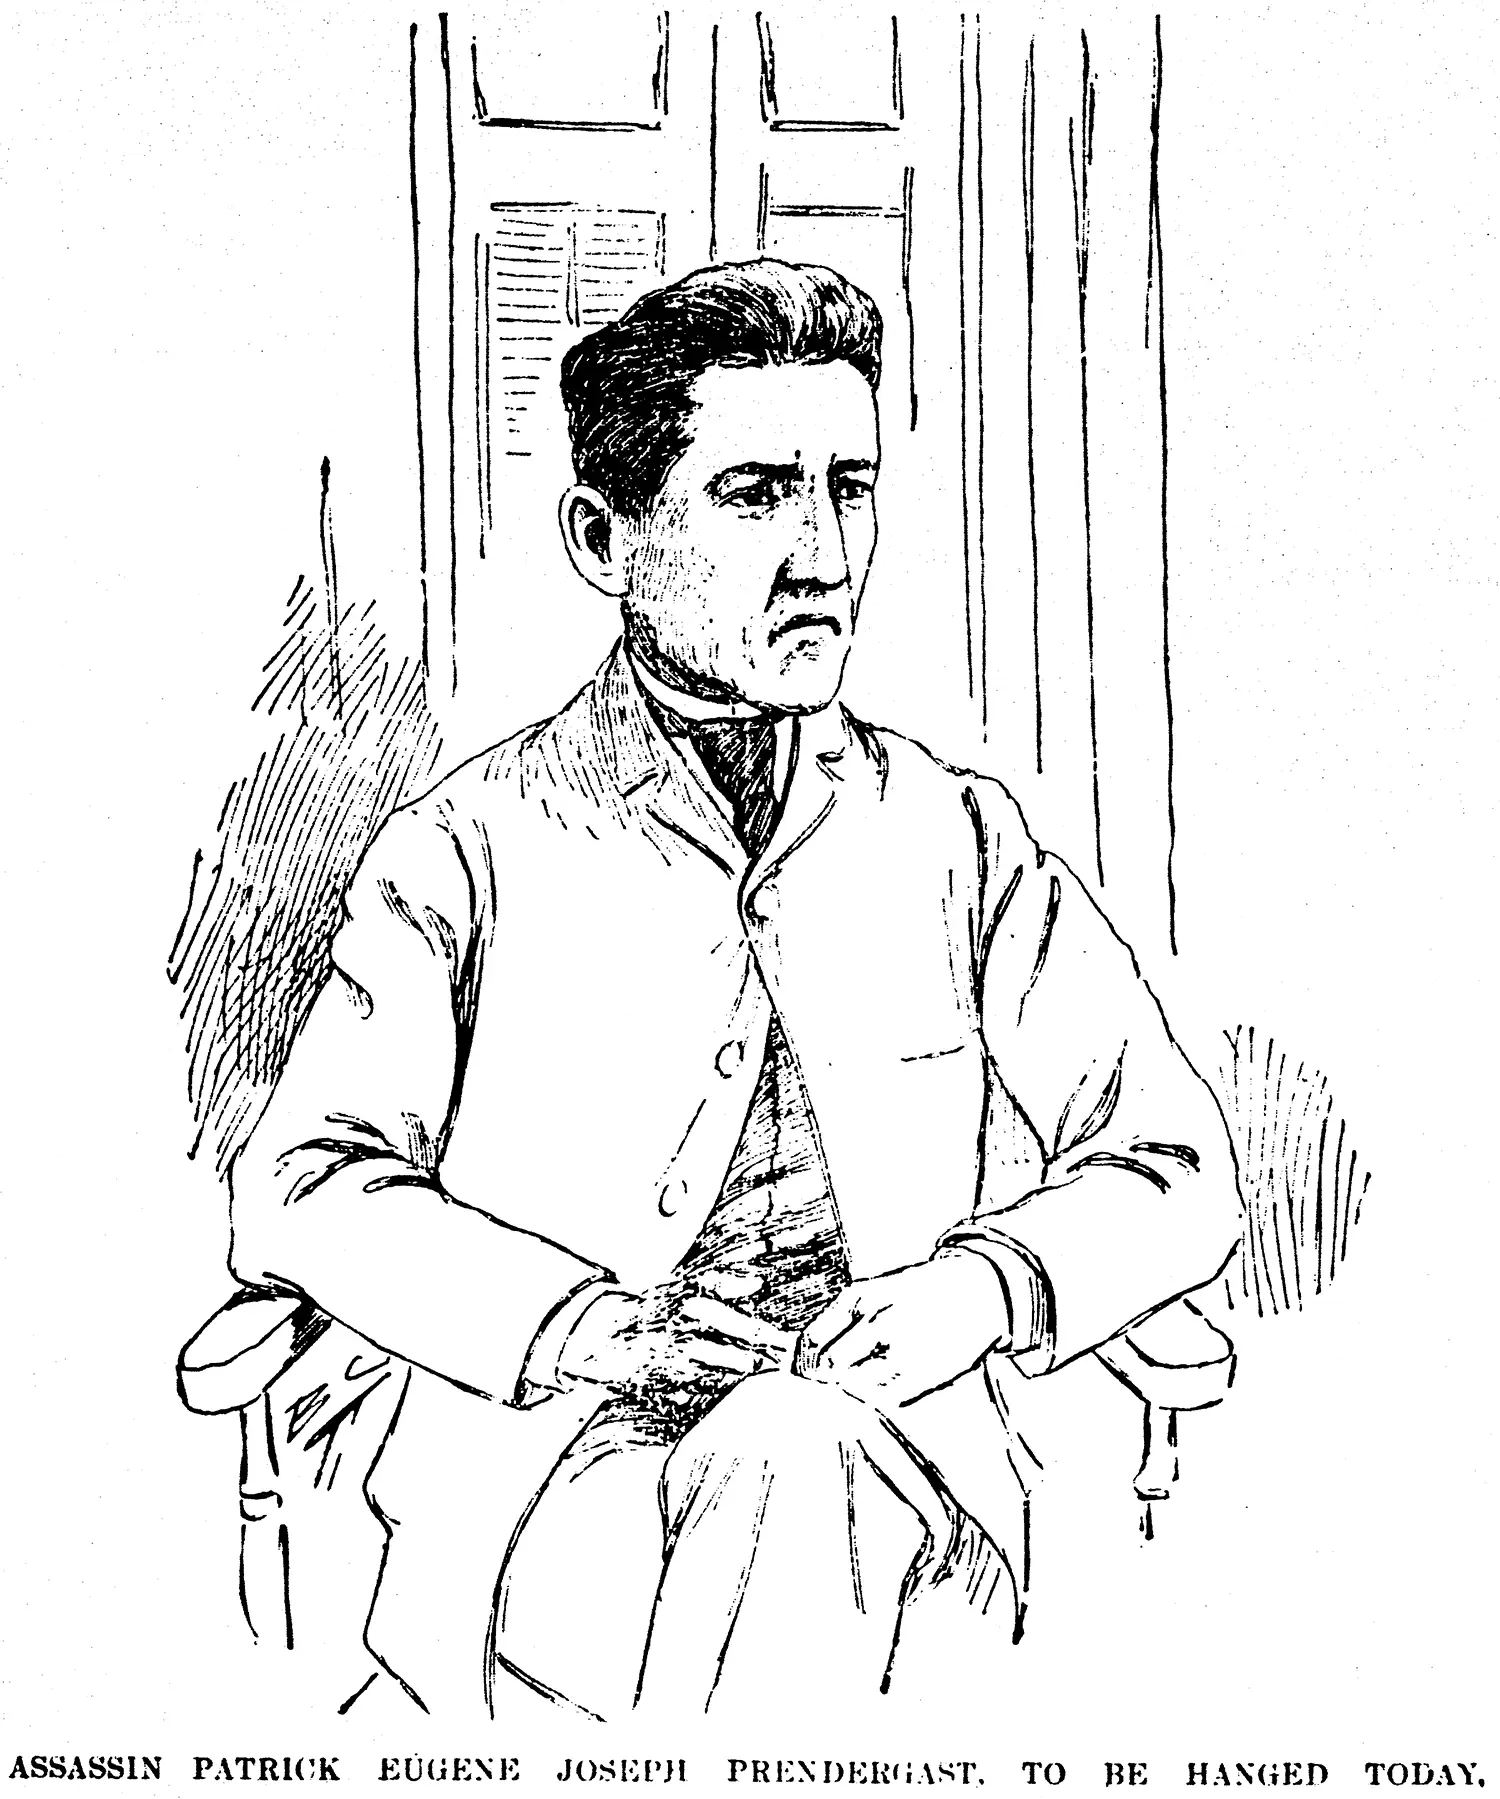 Drawing of a man seated in a chair. He has downturned lips suggesting a frown. The image is subtitled “Assassin Patrick Eugene Joseph Prendergast, To Be Hanged Today.” 